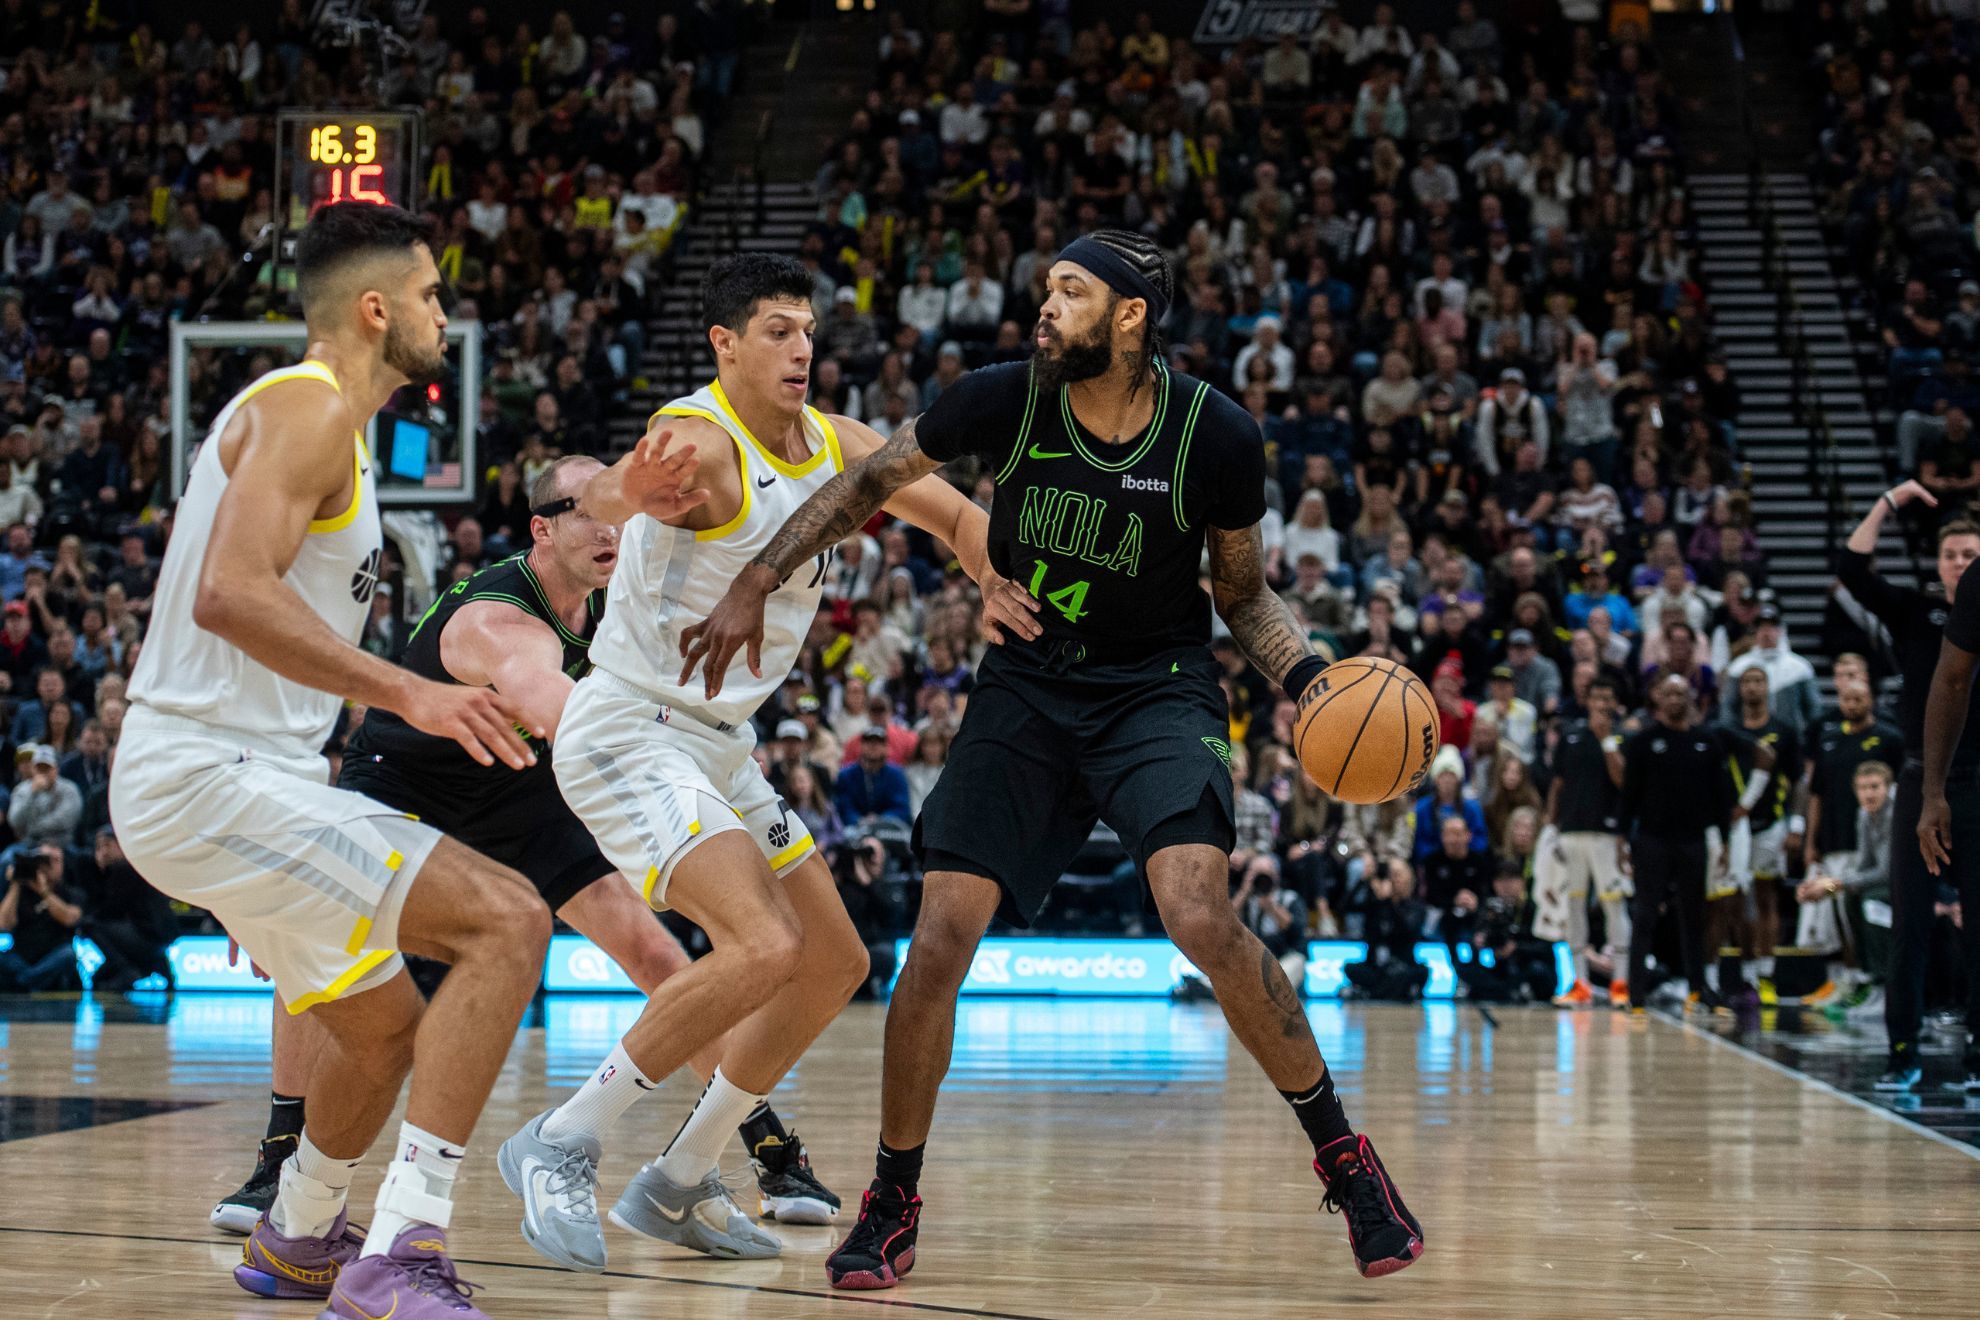 Jazz hold off Zion-less Pelicans with big fourth quarter rally for five-point win